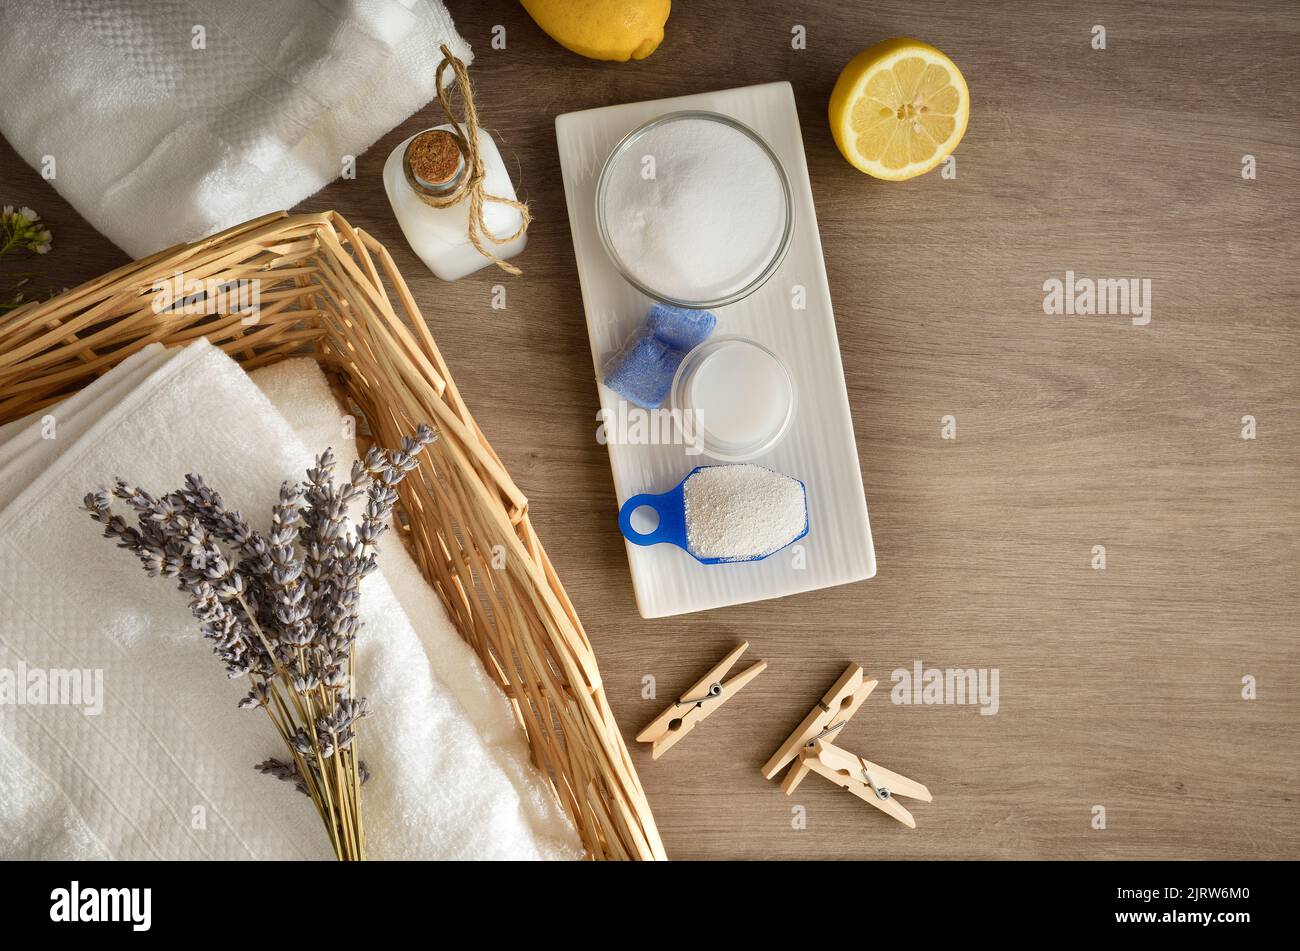 Clothes washing concept with towels and products on wooden table. Top view. Horizontal composition. Stock Photo